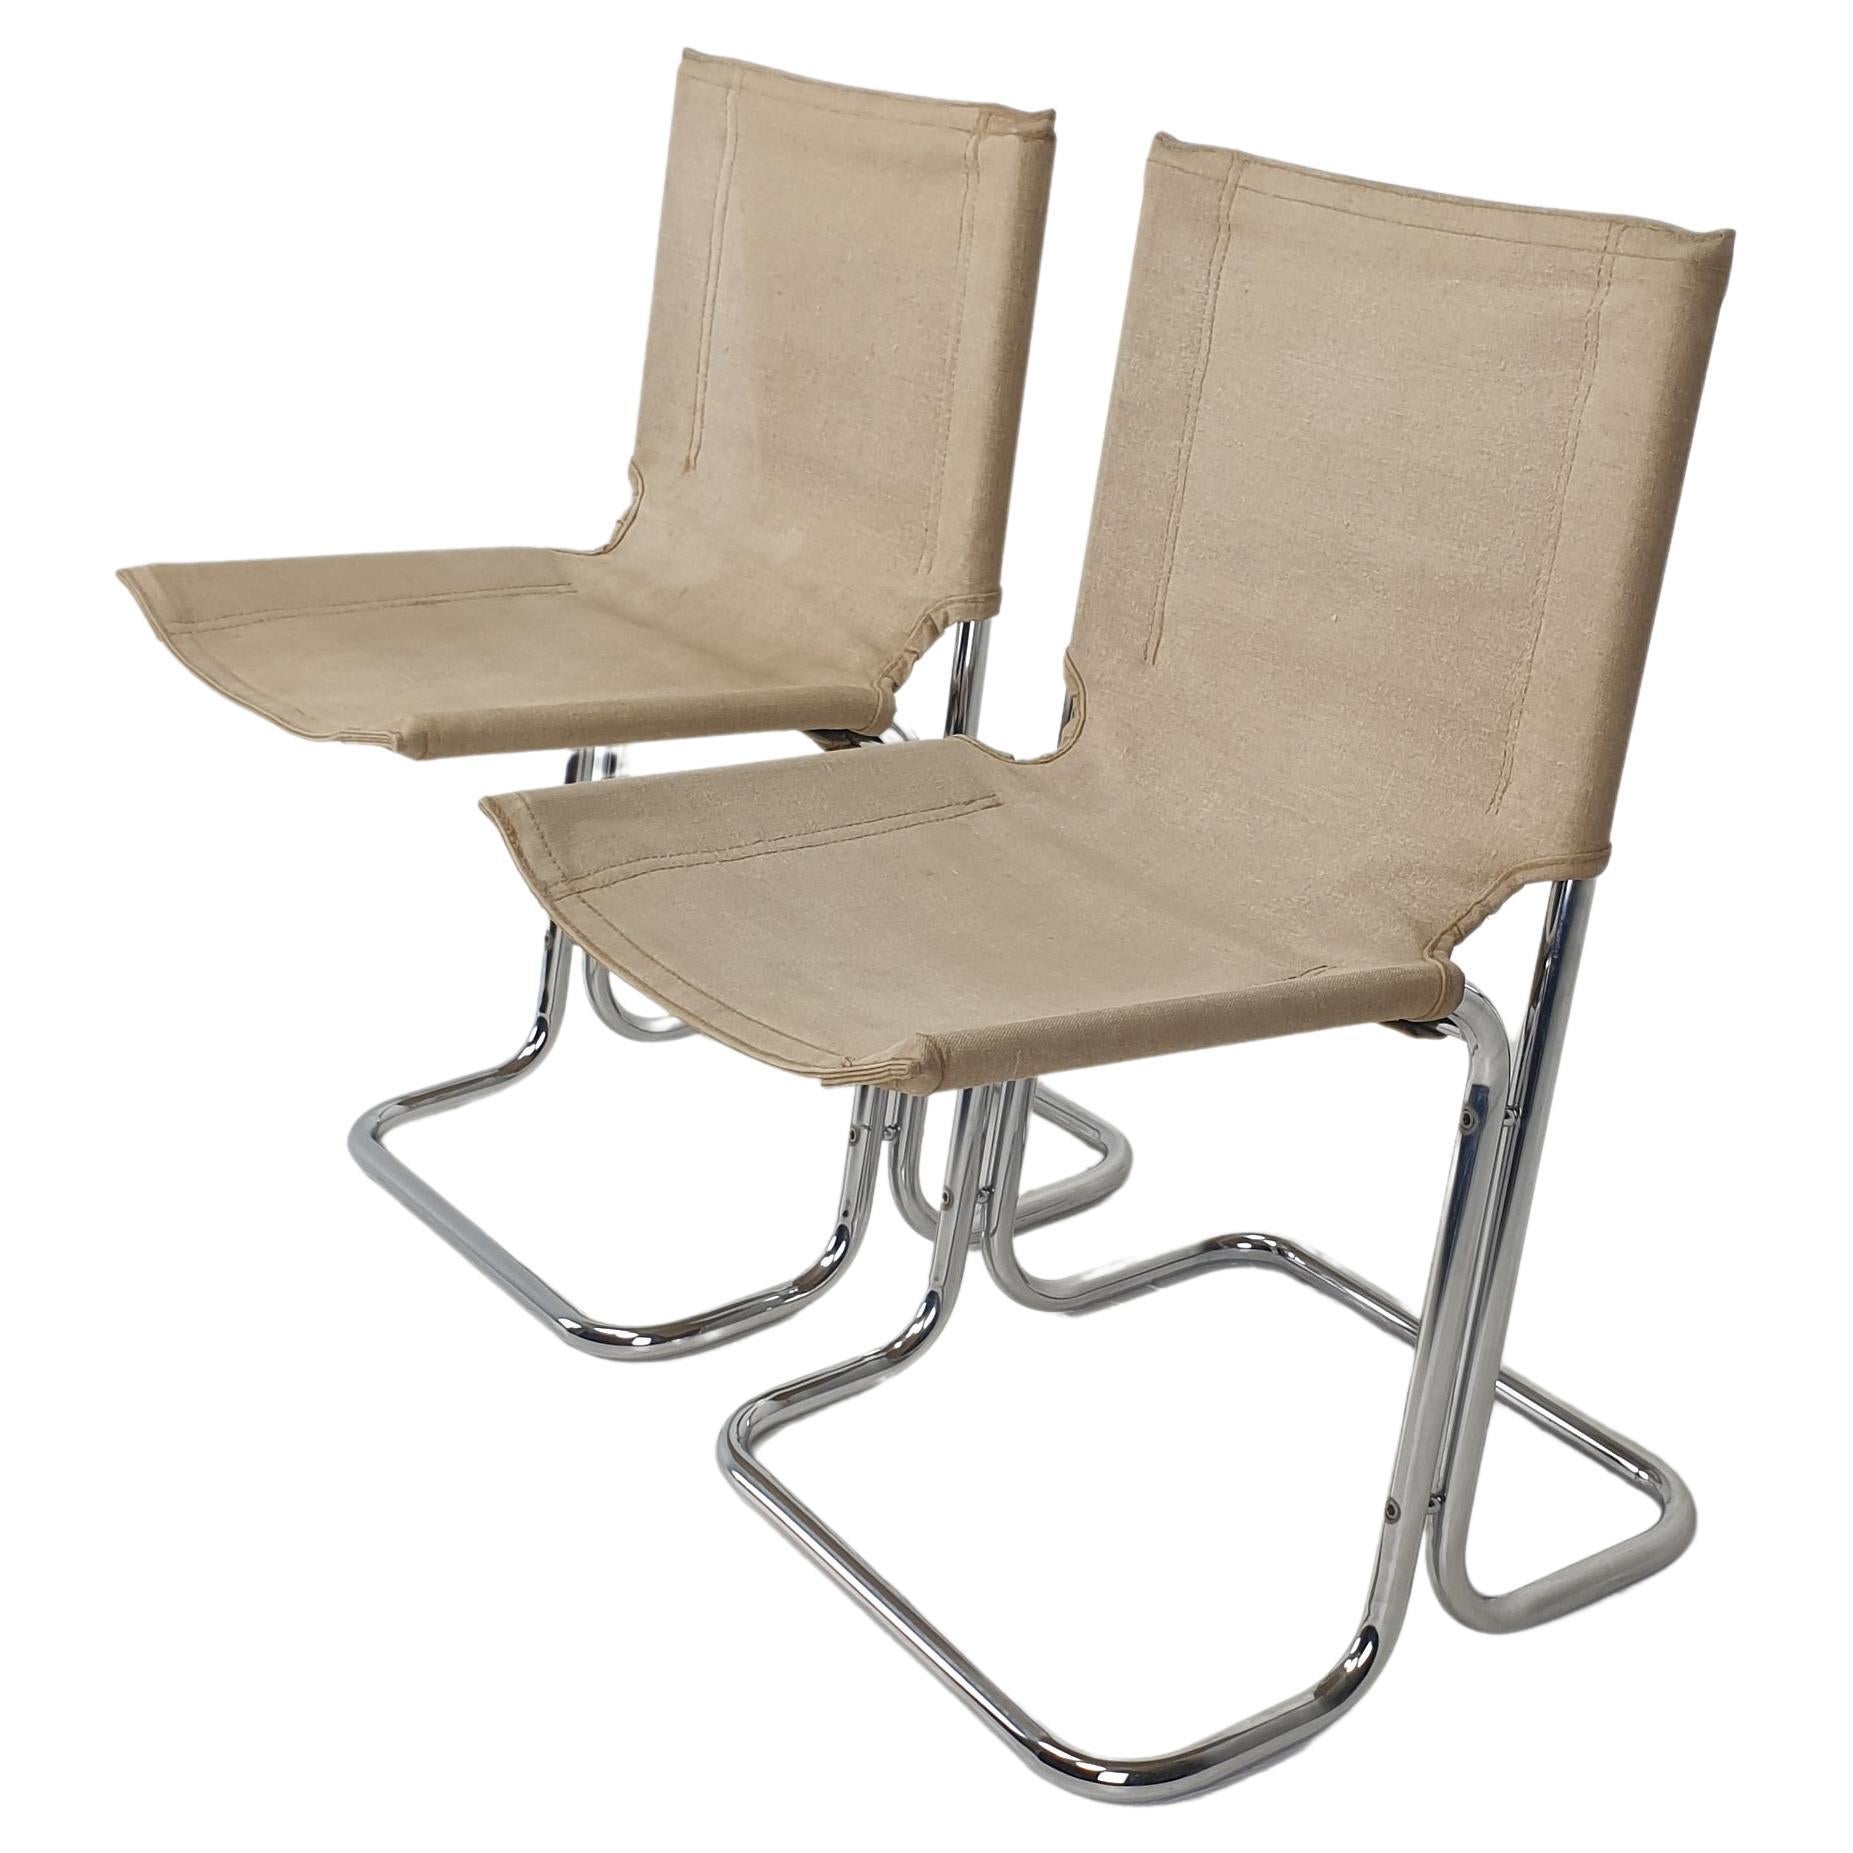 Set of 2 Italian Canvas and Chromed Metal Chairs, 1970's